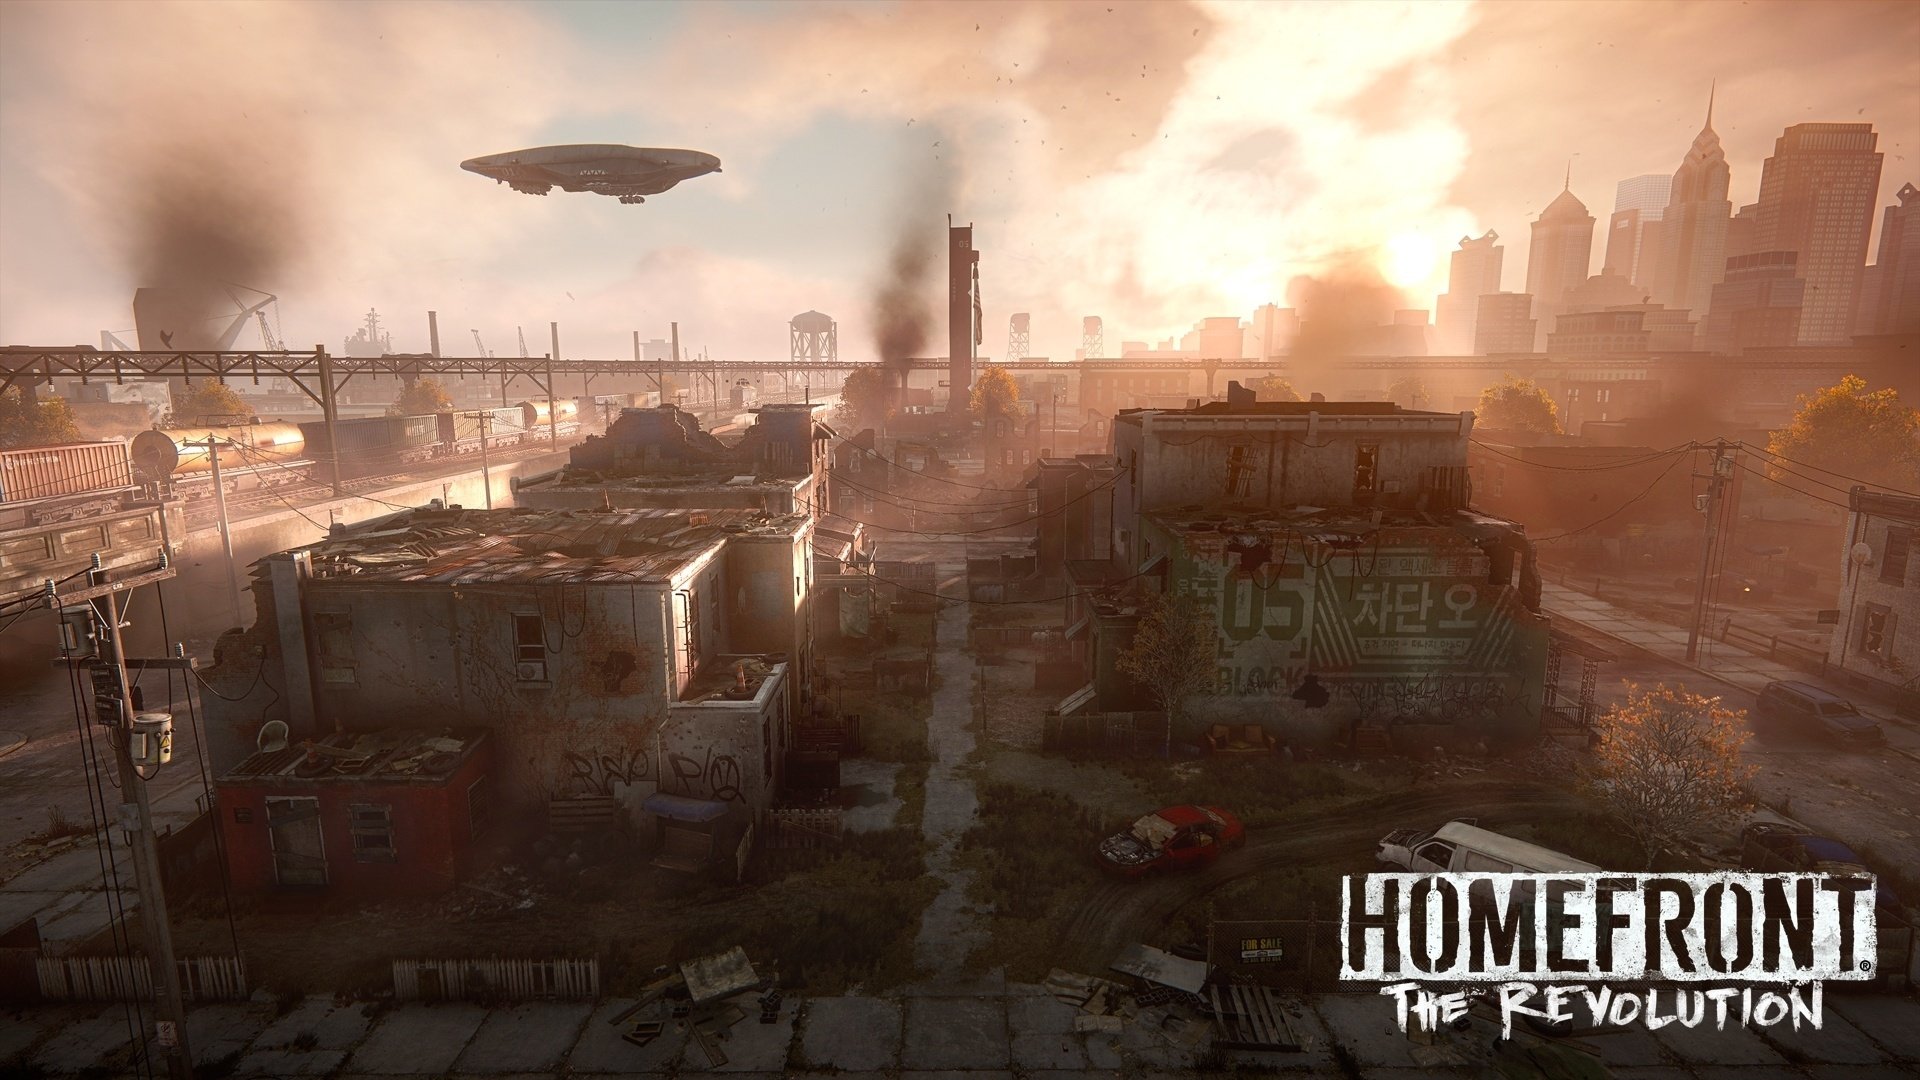 Best Homefront: The Revolution wallpaper ID:193863 for High Resolution hd 1920x1080 computer